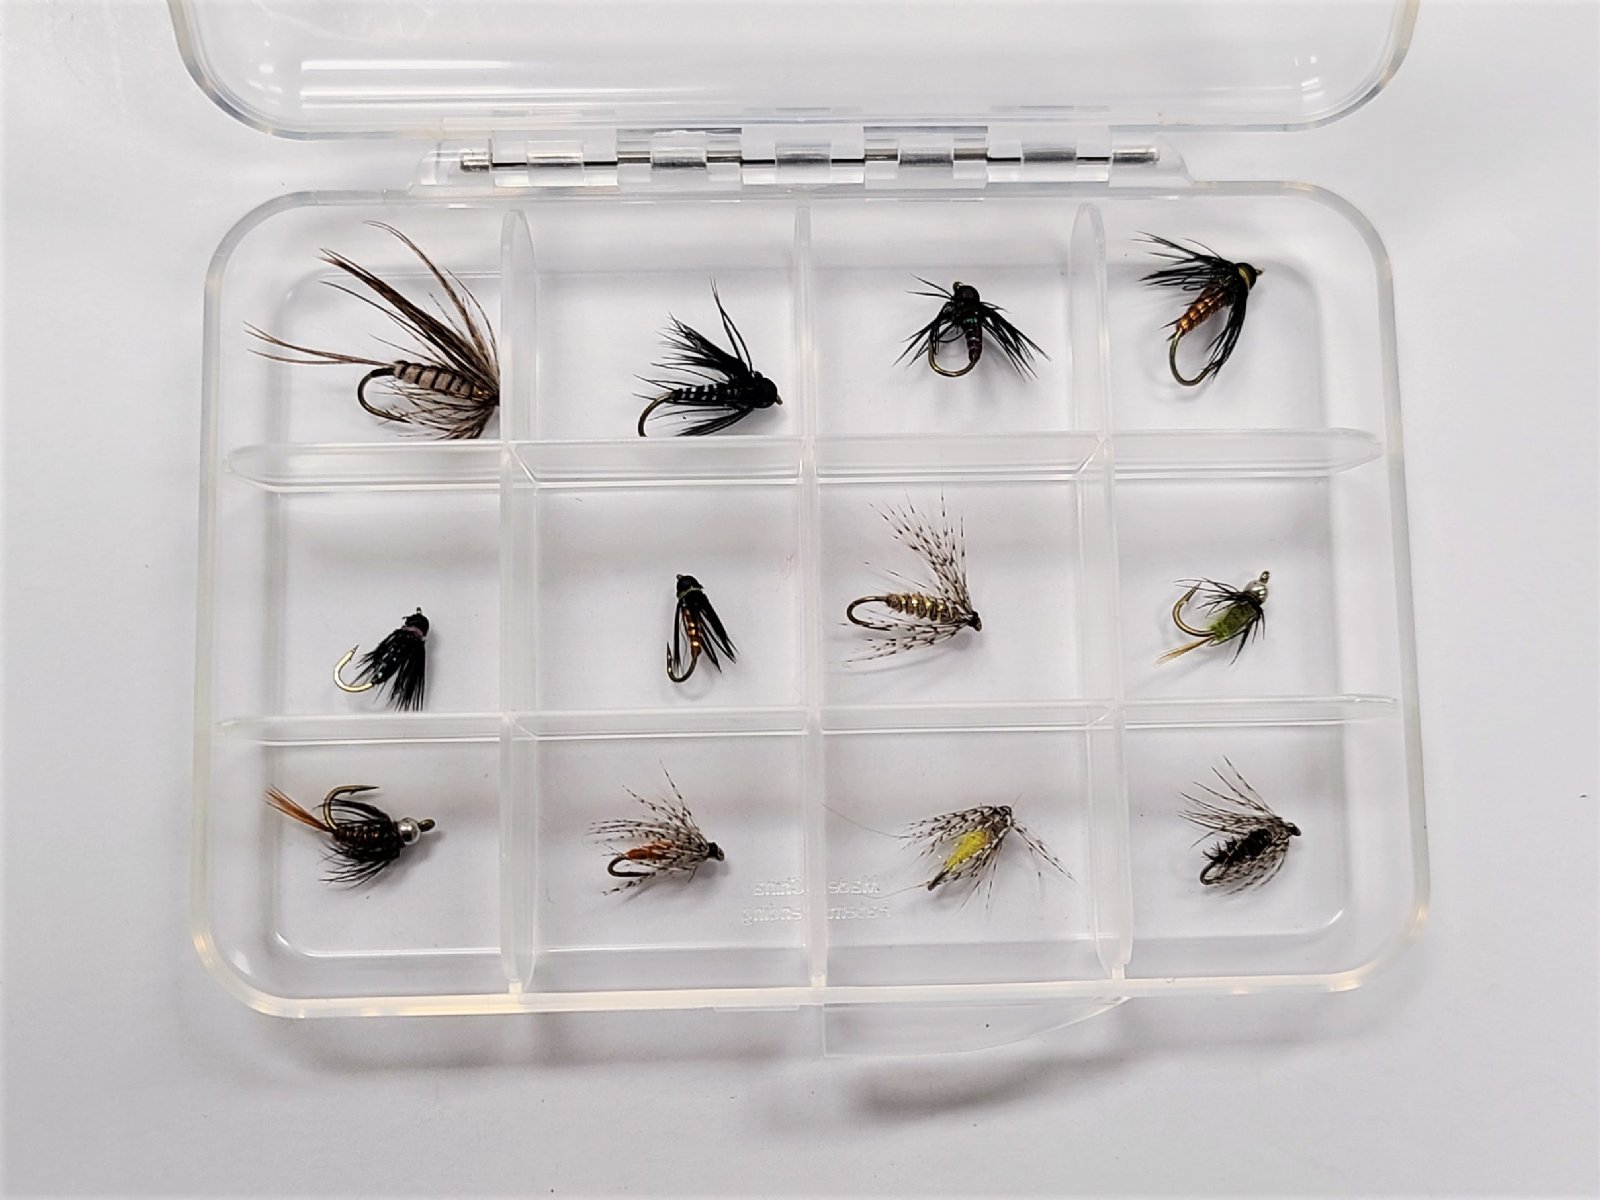 Micro Spey Tactics for Trout - Fly Fisherman